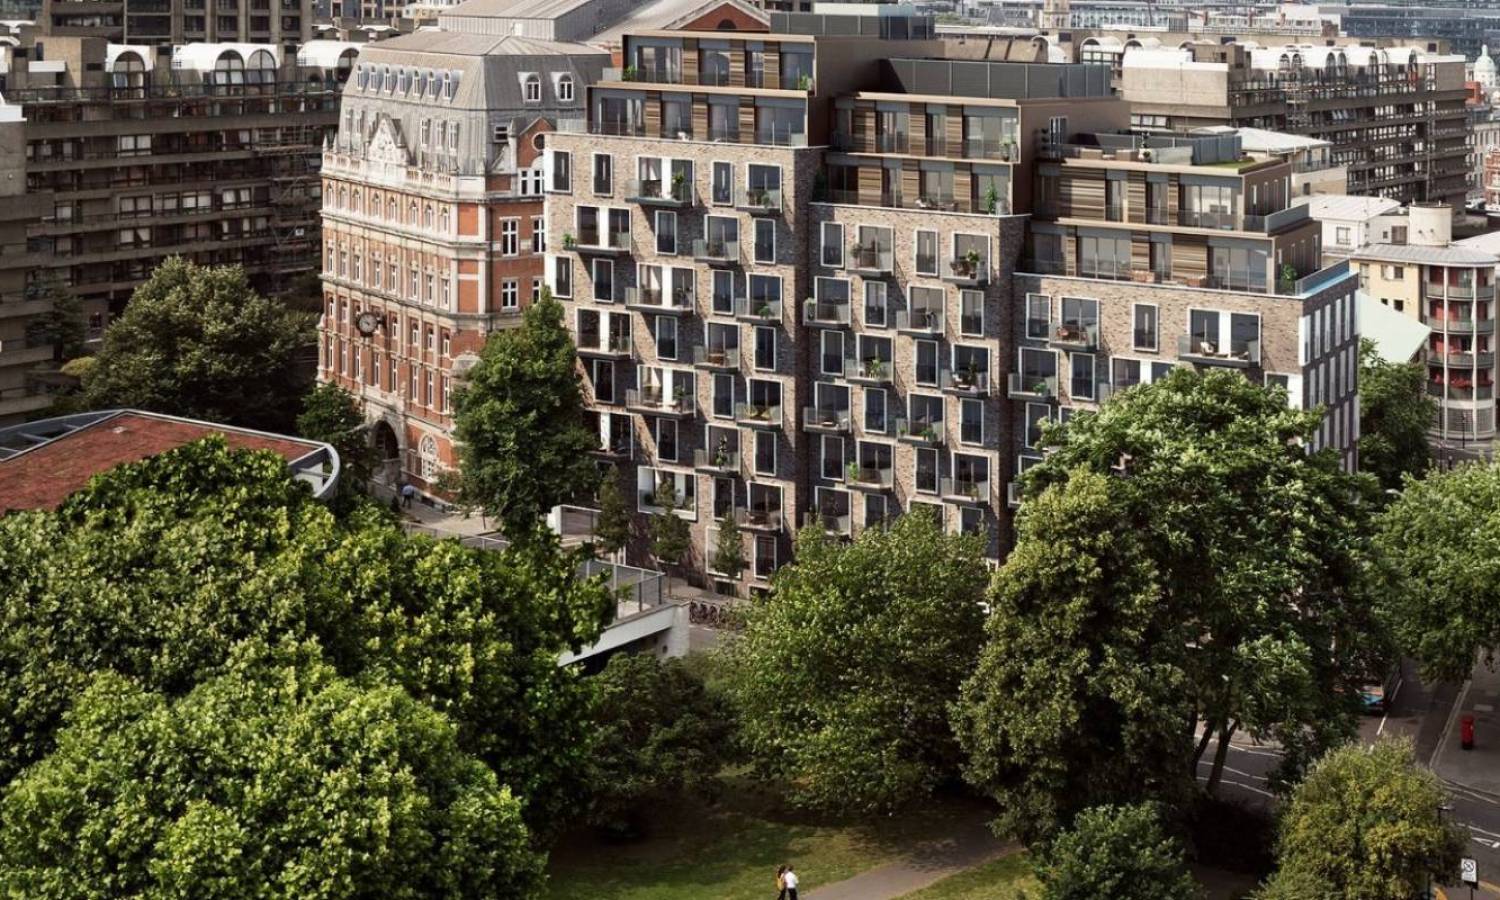 Discover Your Ideal Home in the Heart of London